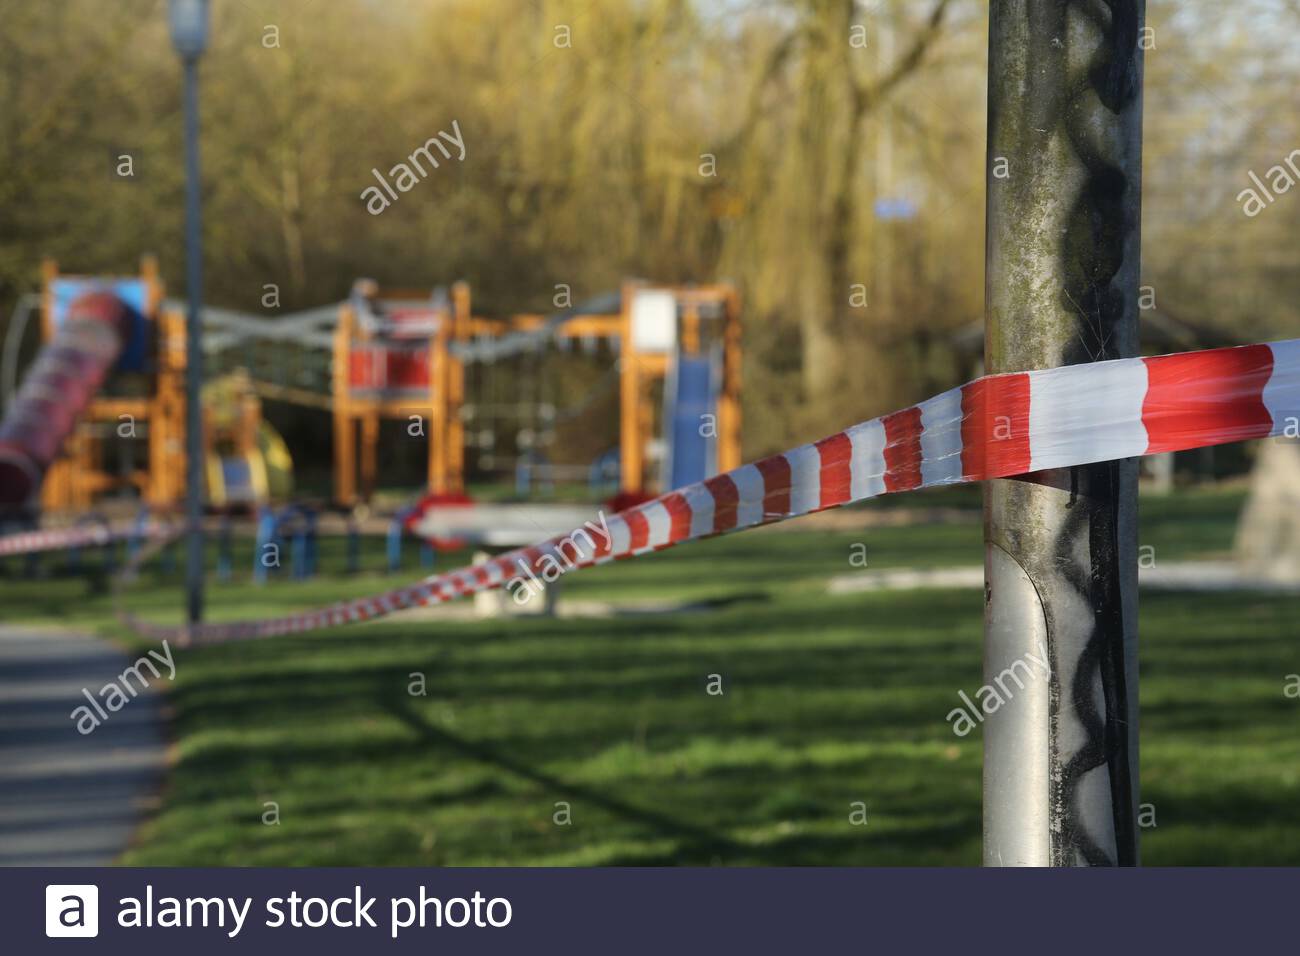 A closed-off, deserted playground in Coburg, Bavaria, this morning as strict rules concerning movement outside the home continue to be implemented. Stock Photo